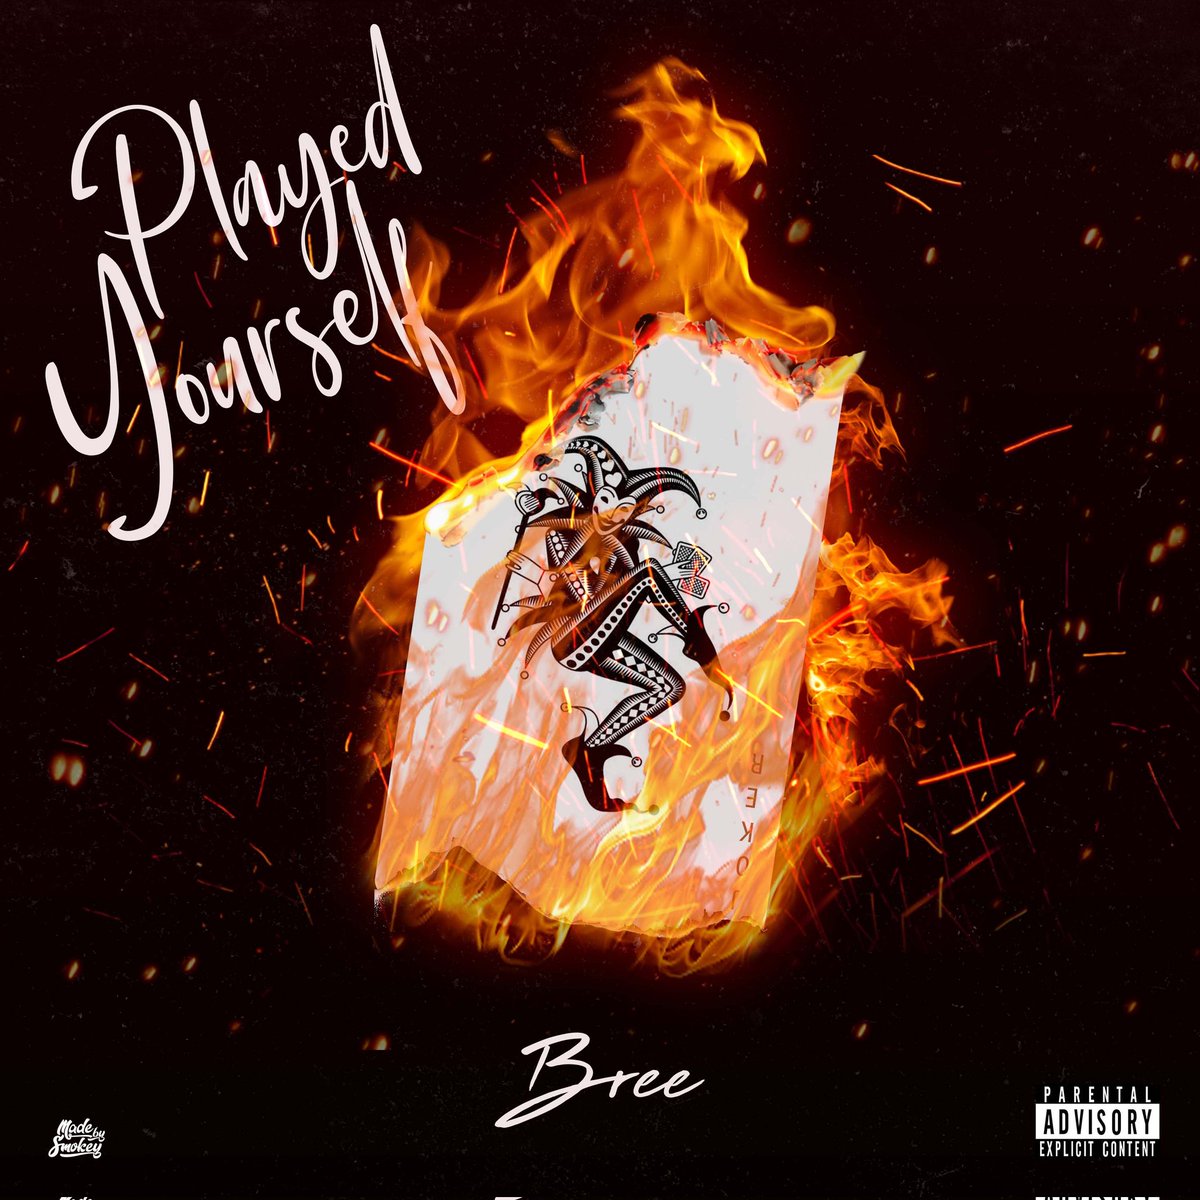 New cover art for - Bree | Played yourself
.
Need music cover art x motion graphics? Send a DM. 
.
#art #digitalart #music #musiccoverart #single #singlecoverart #mixtape #ep #cartooncoverart #rnb #artist #newmusic #graphicdesign #clipstudiopaint #graphicdesigner #madebysmokey